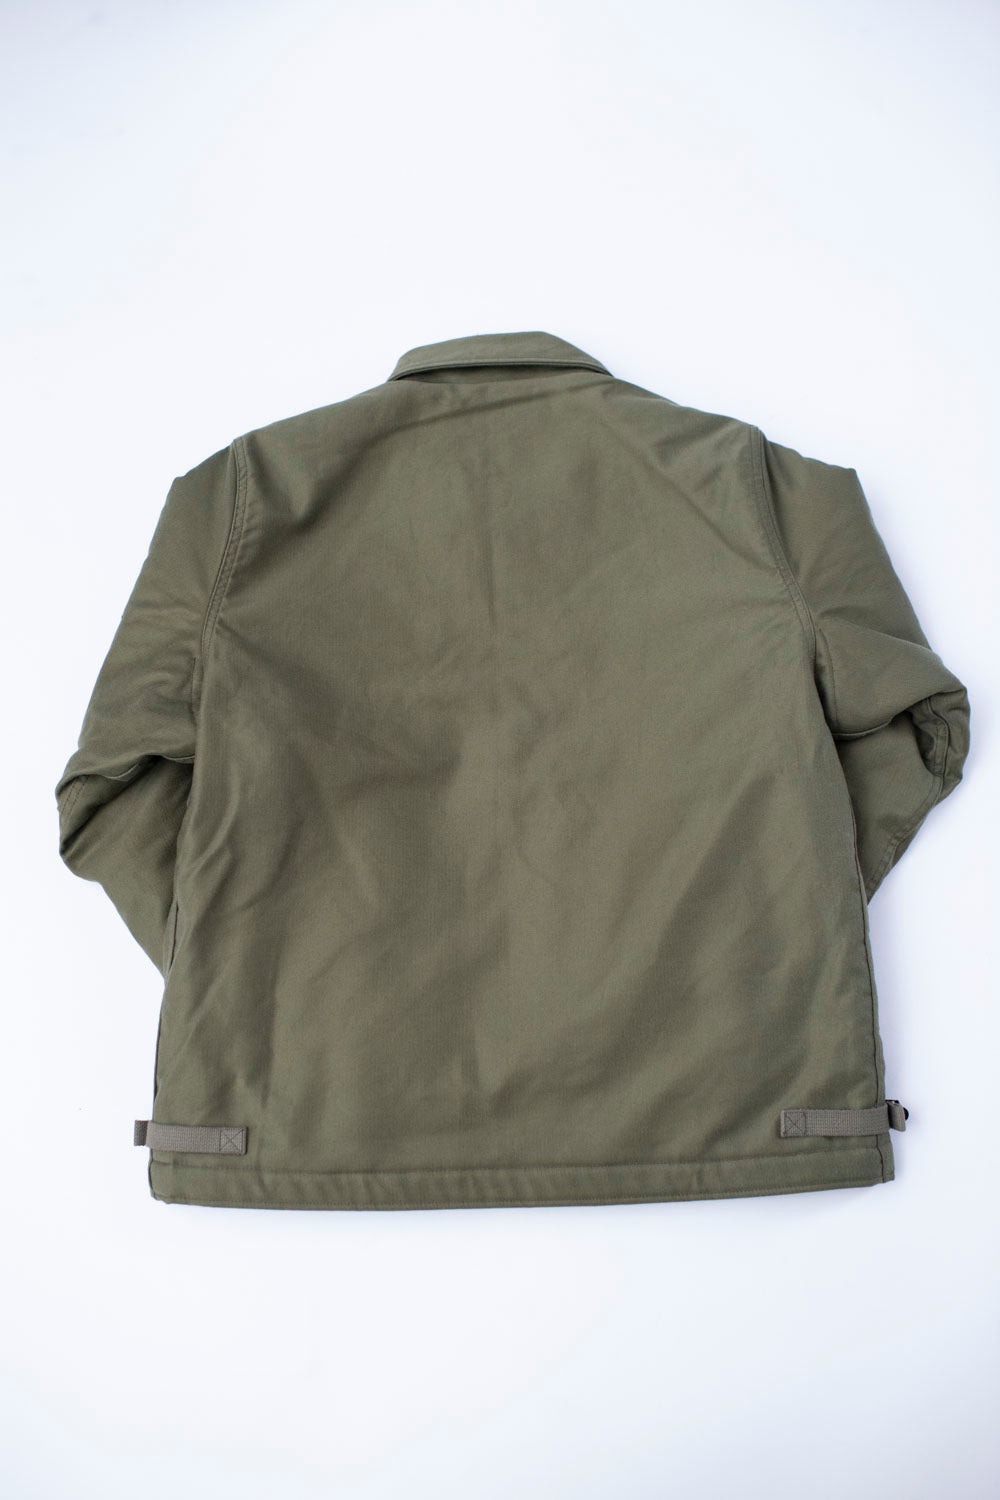 IHM-40-GRN - Whipcord A2 Deck Jacket - Olive Drab Green